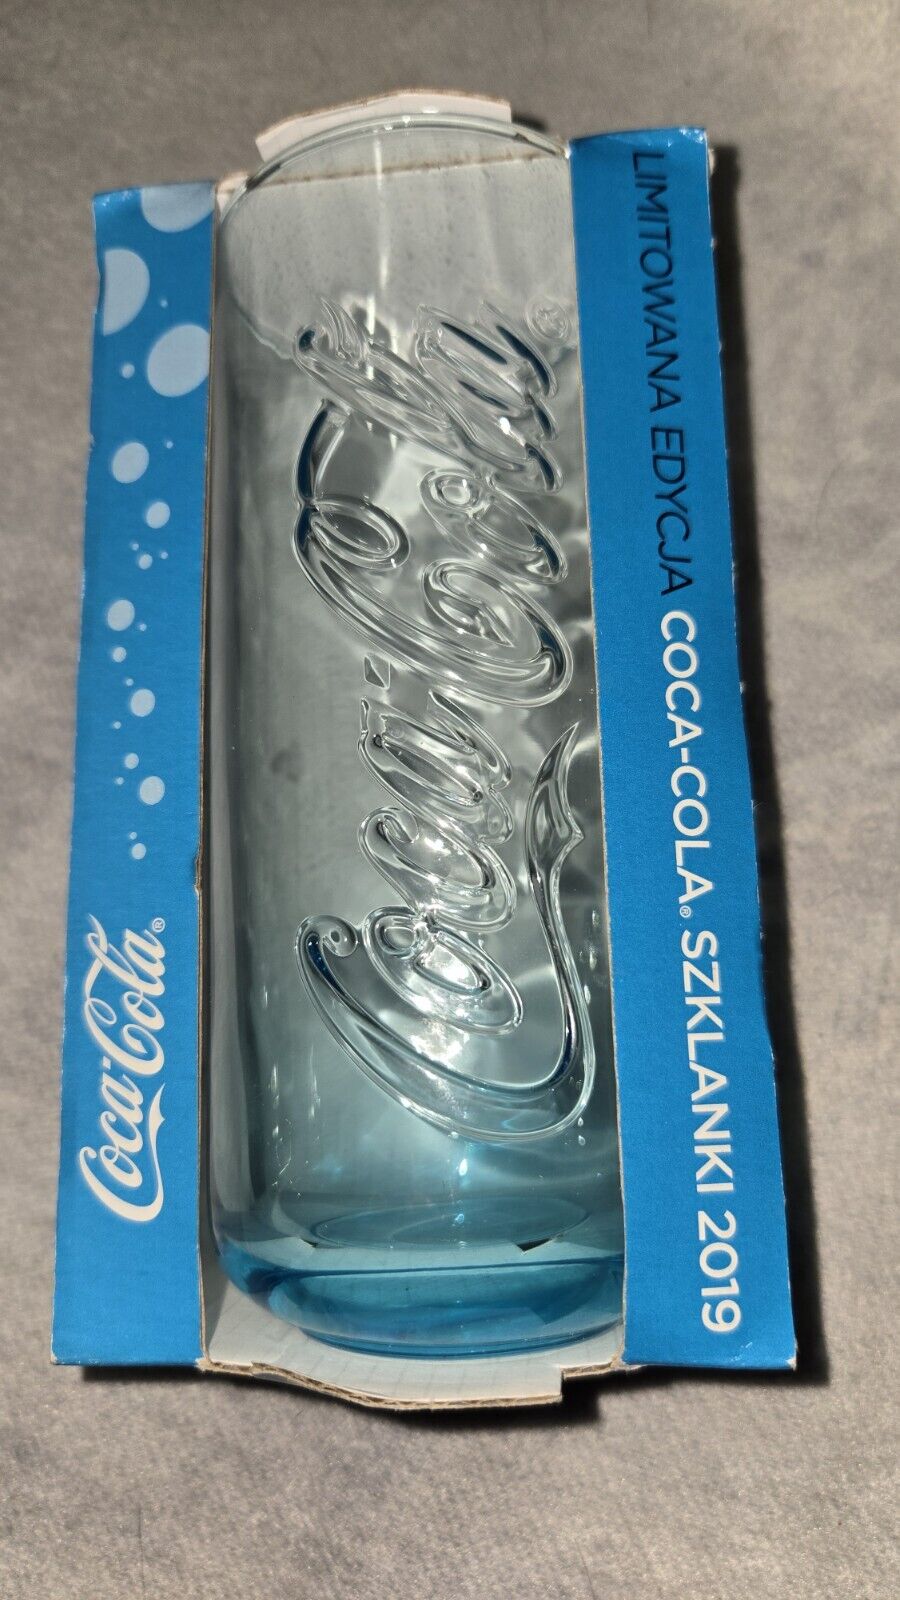 Extremely rare Vintage 2019 Poland Mcdonalds Collectible Blue Glass